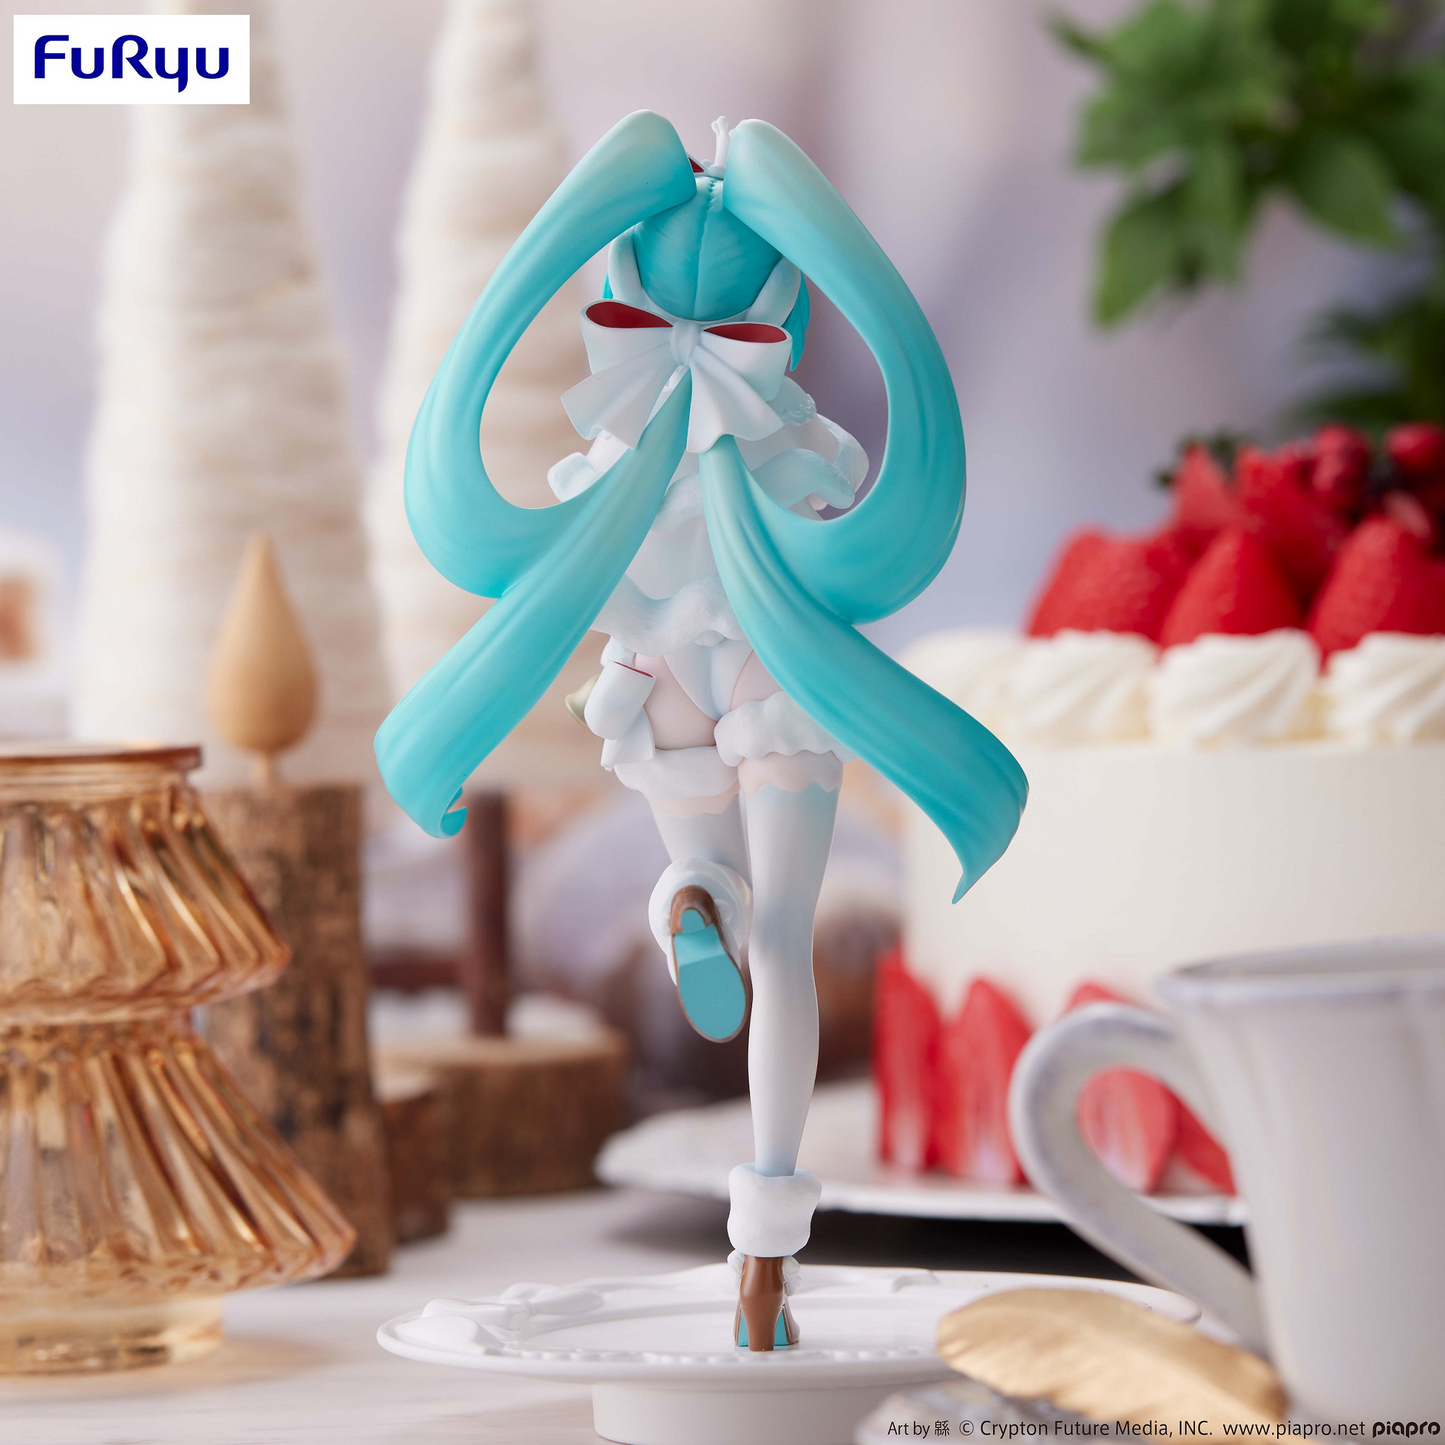 Vocaloid: Miku -SweetSweets Series Noel- Exceed Creative Prize Figure